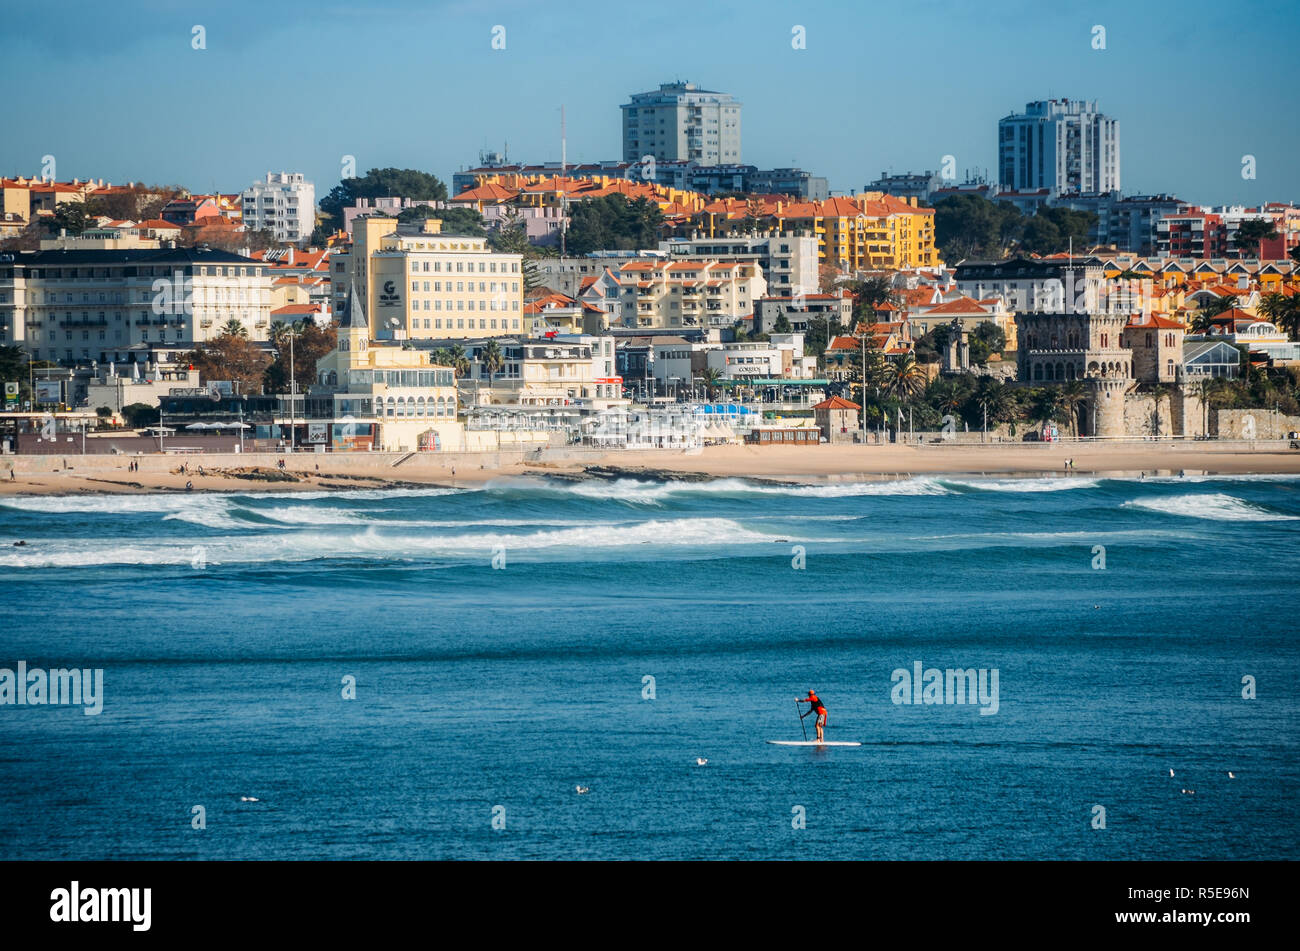 Estoril, Portugal - Nov 30, 2018: Man does stand up paddle overlooking the coast of Estoril near Lisbon, Portugal - with copy space Stock Photo